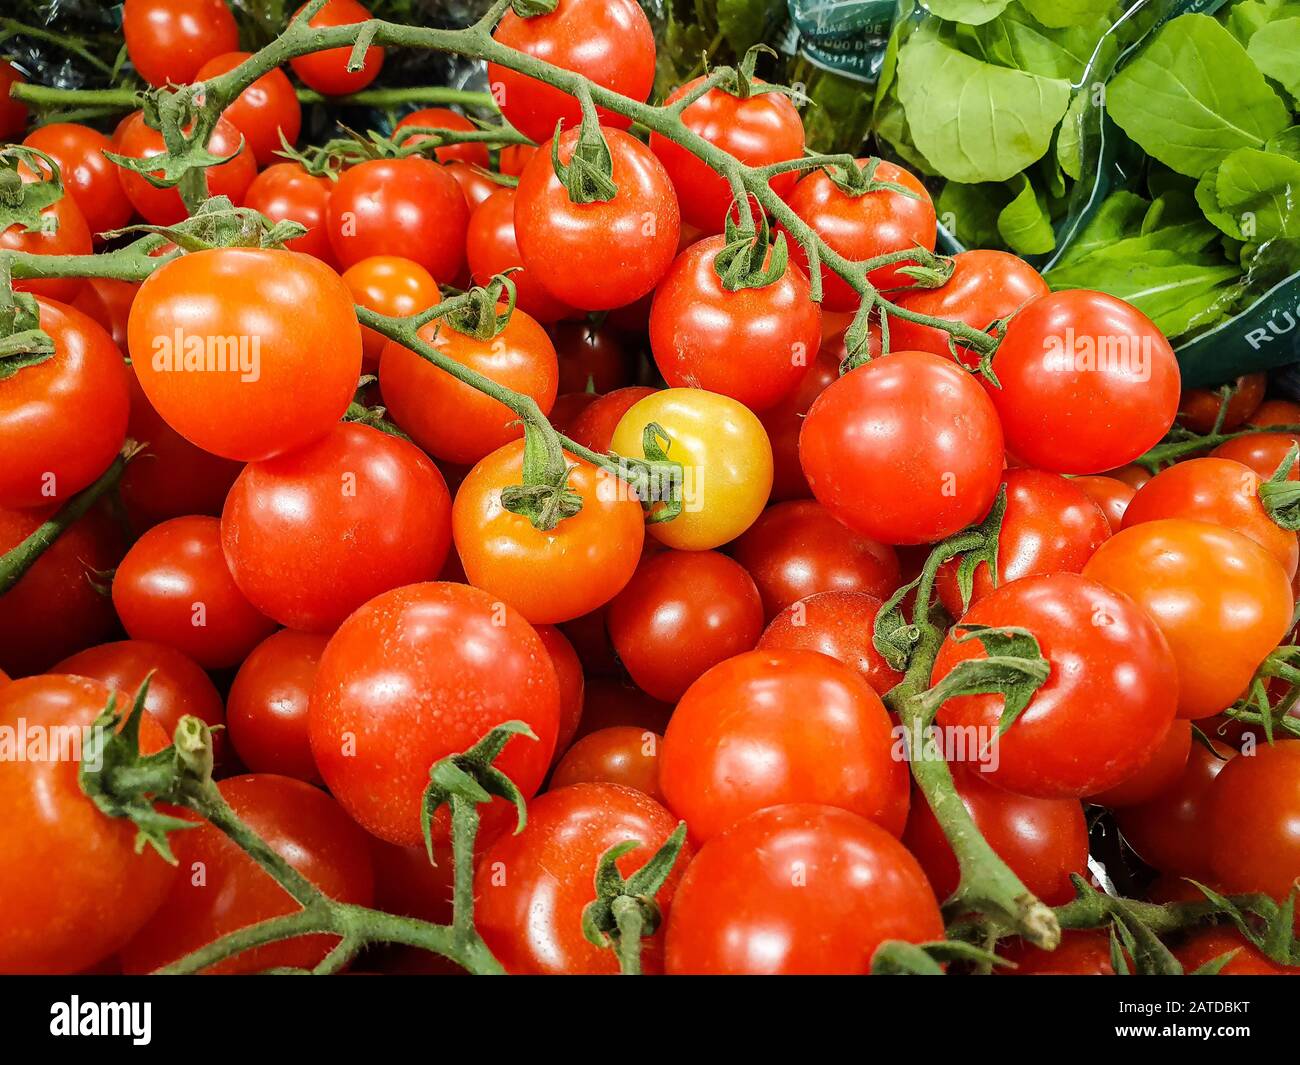 Close-up of tomatoes on the vine Stock Photo